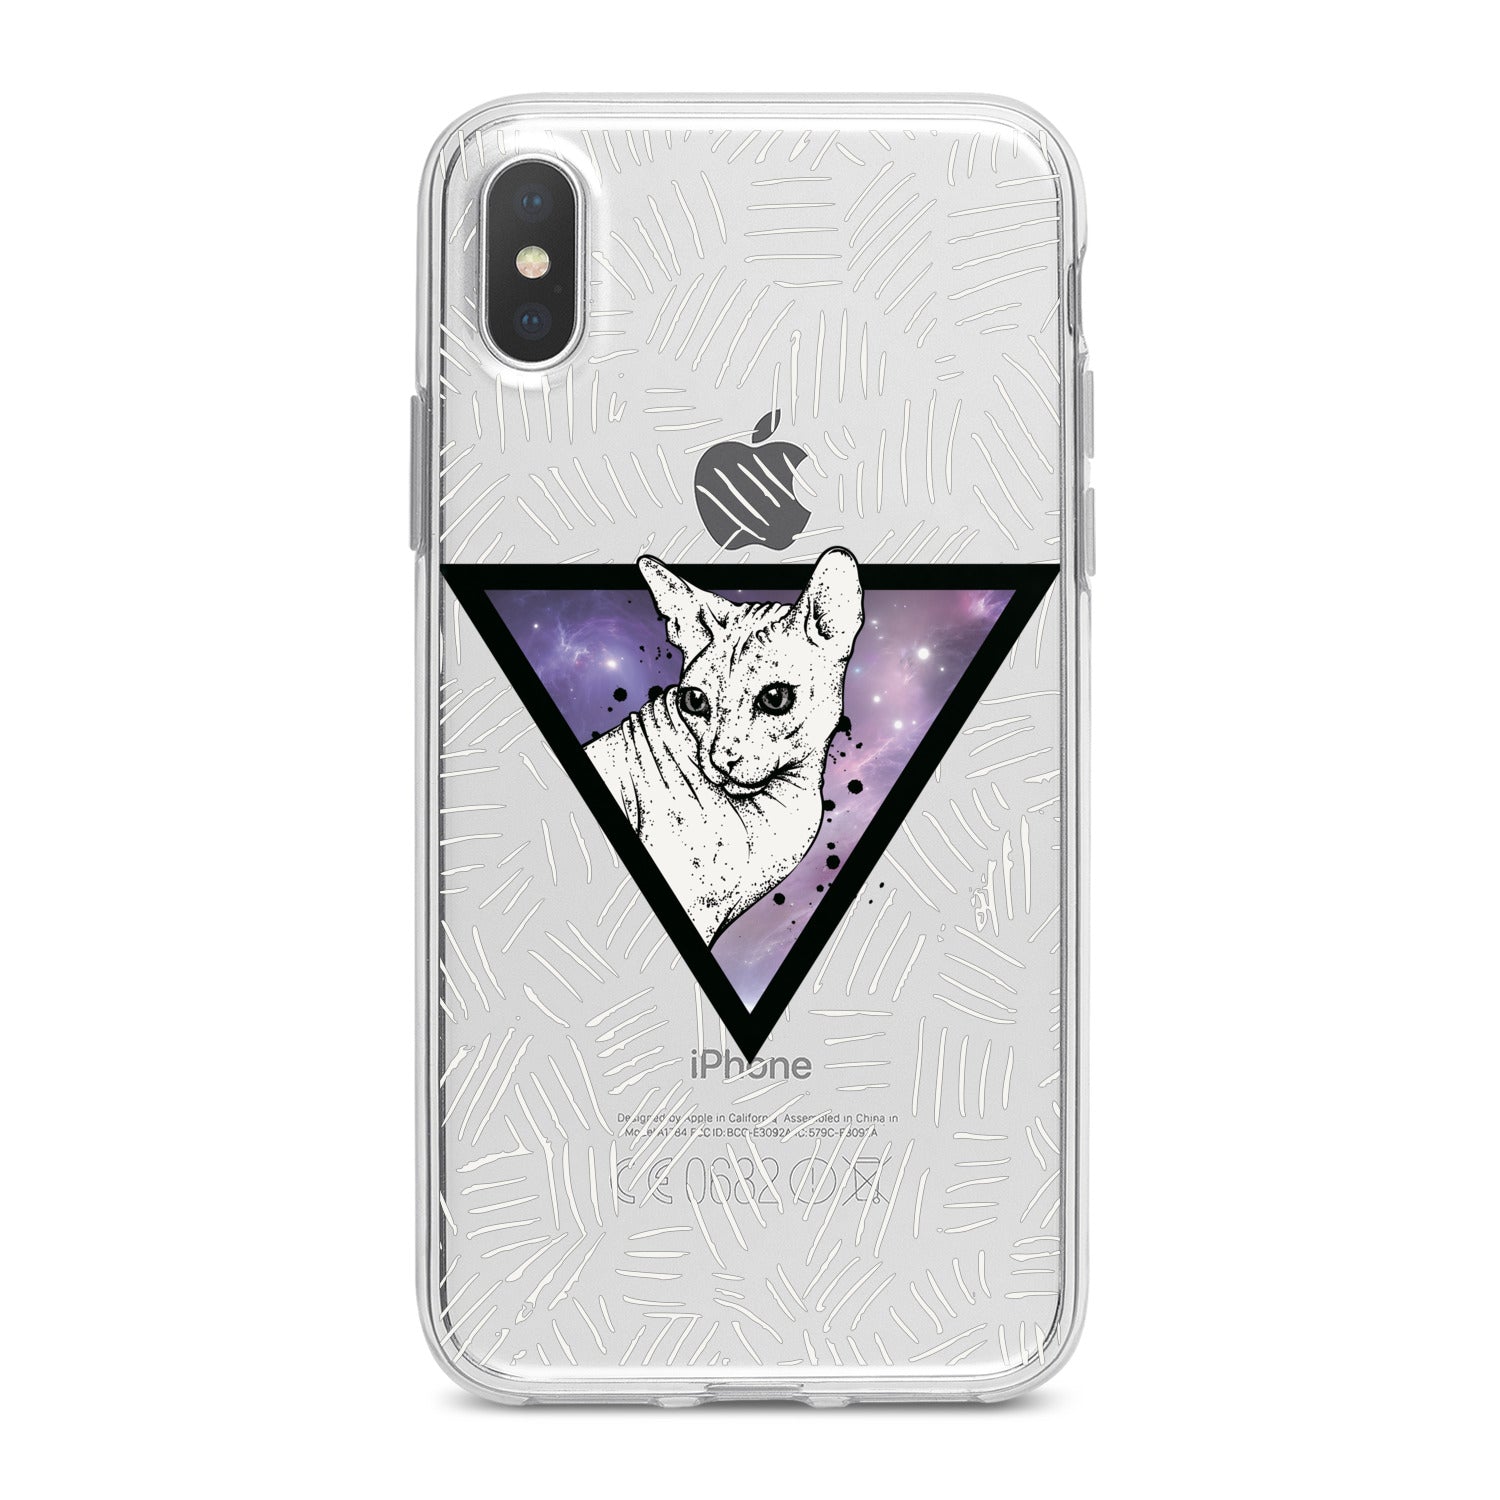 Lex Altern Galaxy Sphynx Cat Phone Case for your iPhone & Android phone.